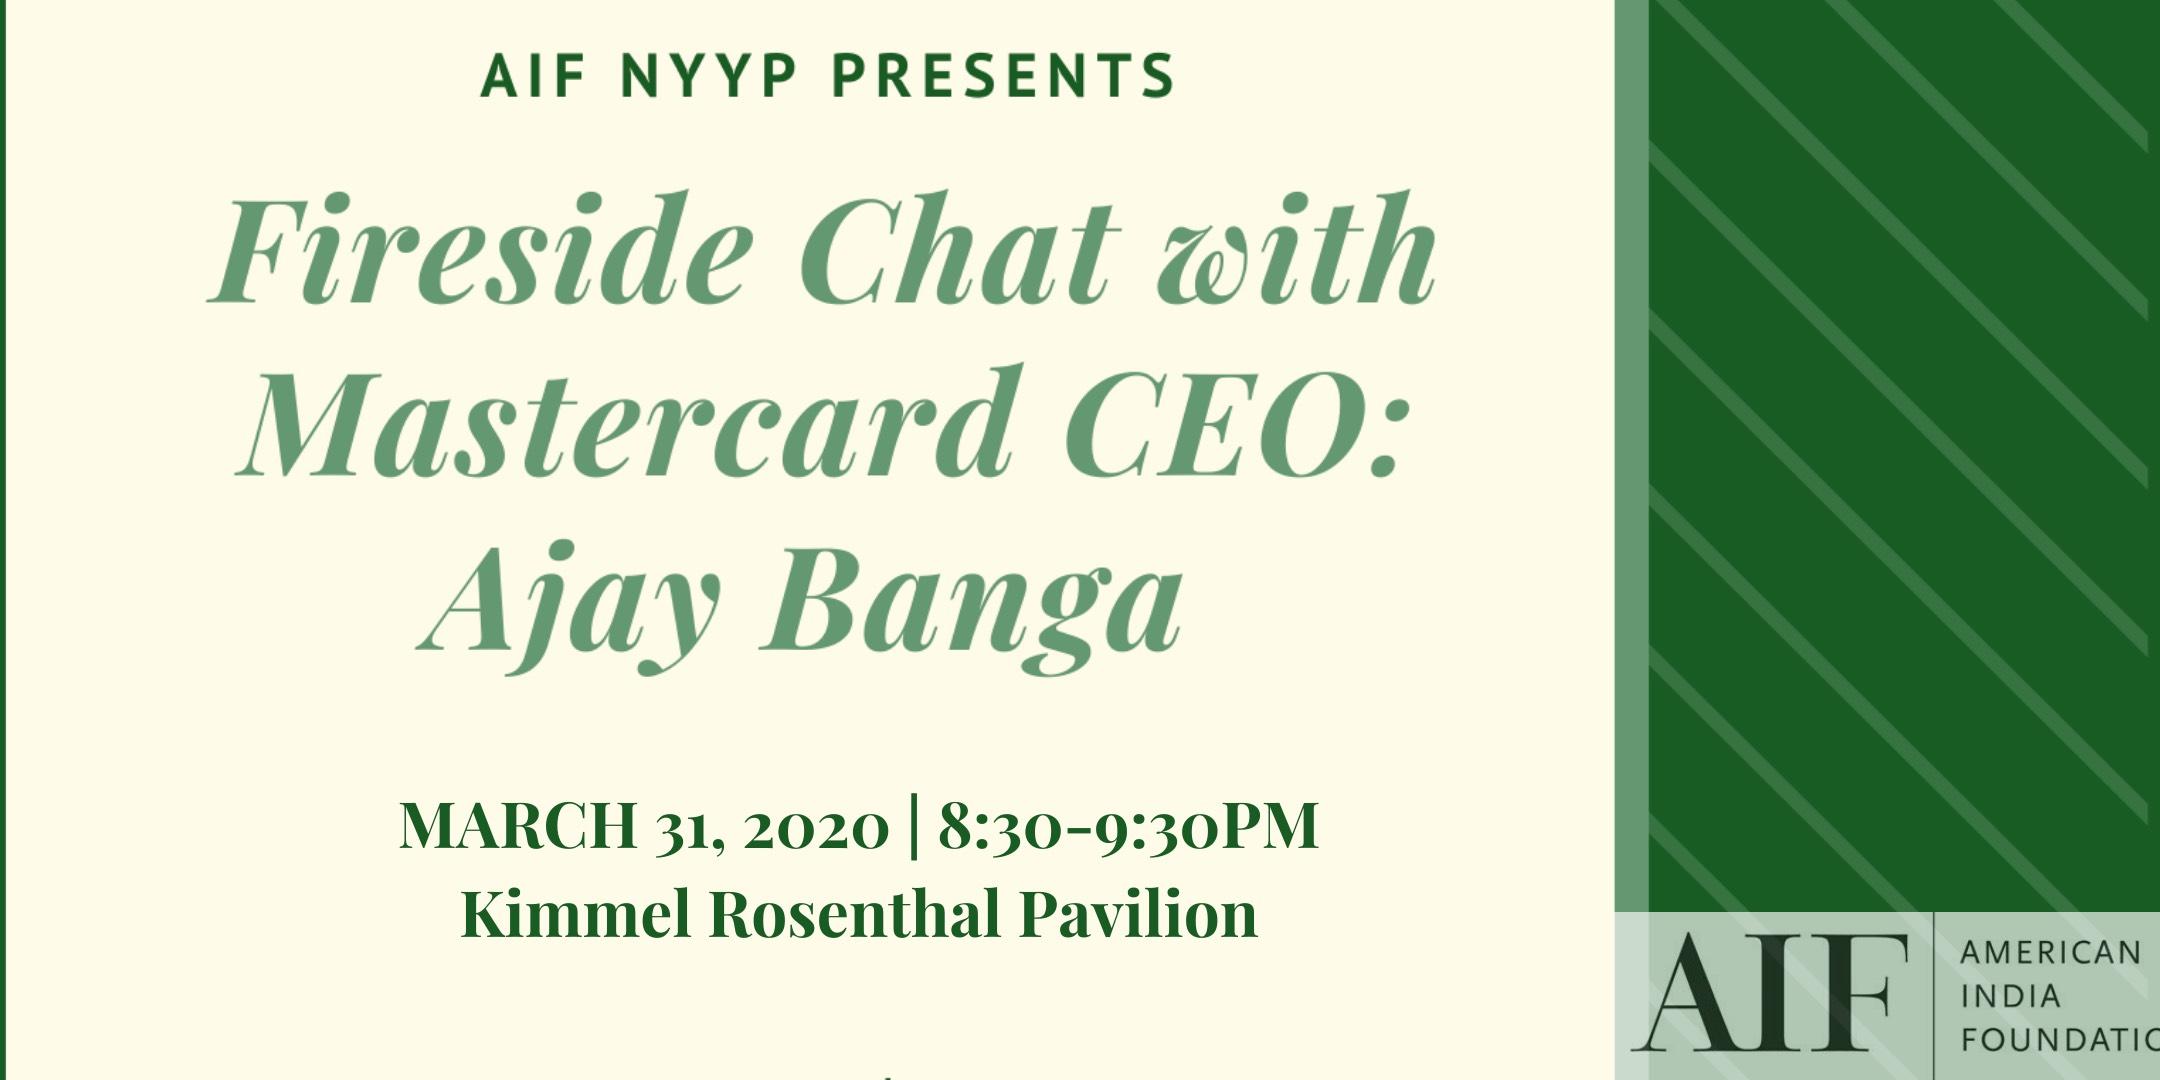 AIF NYYP Presents: A Fireside Chat with Mastercard CEO Ajay Banga